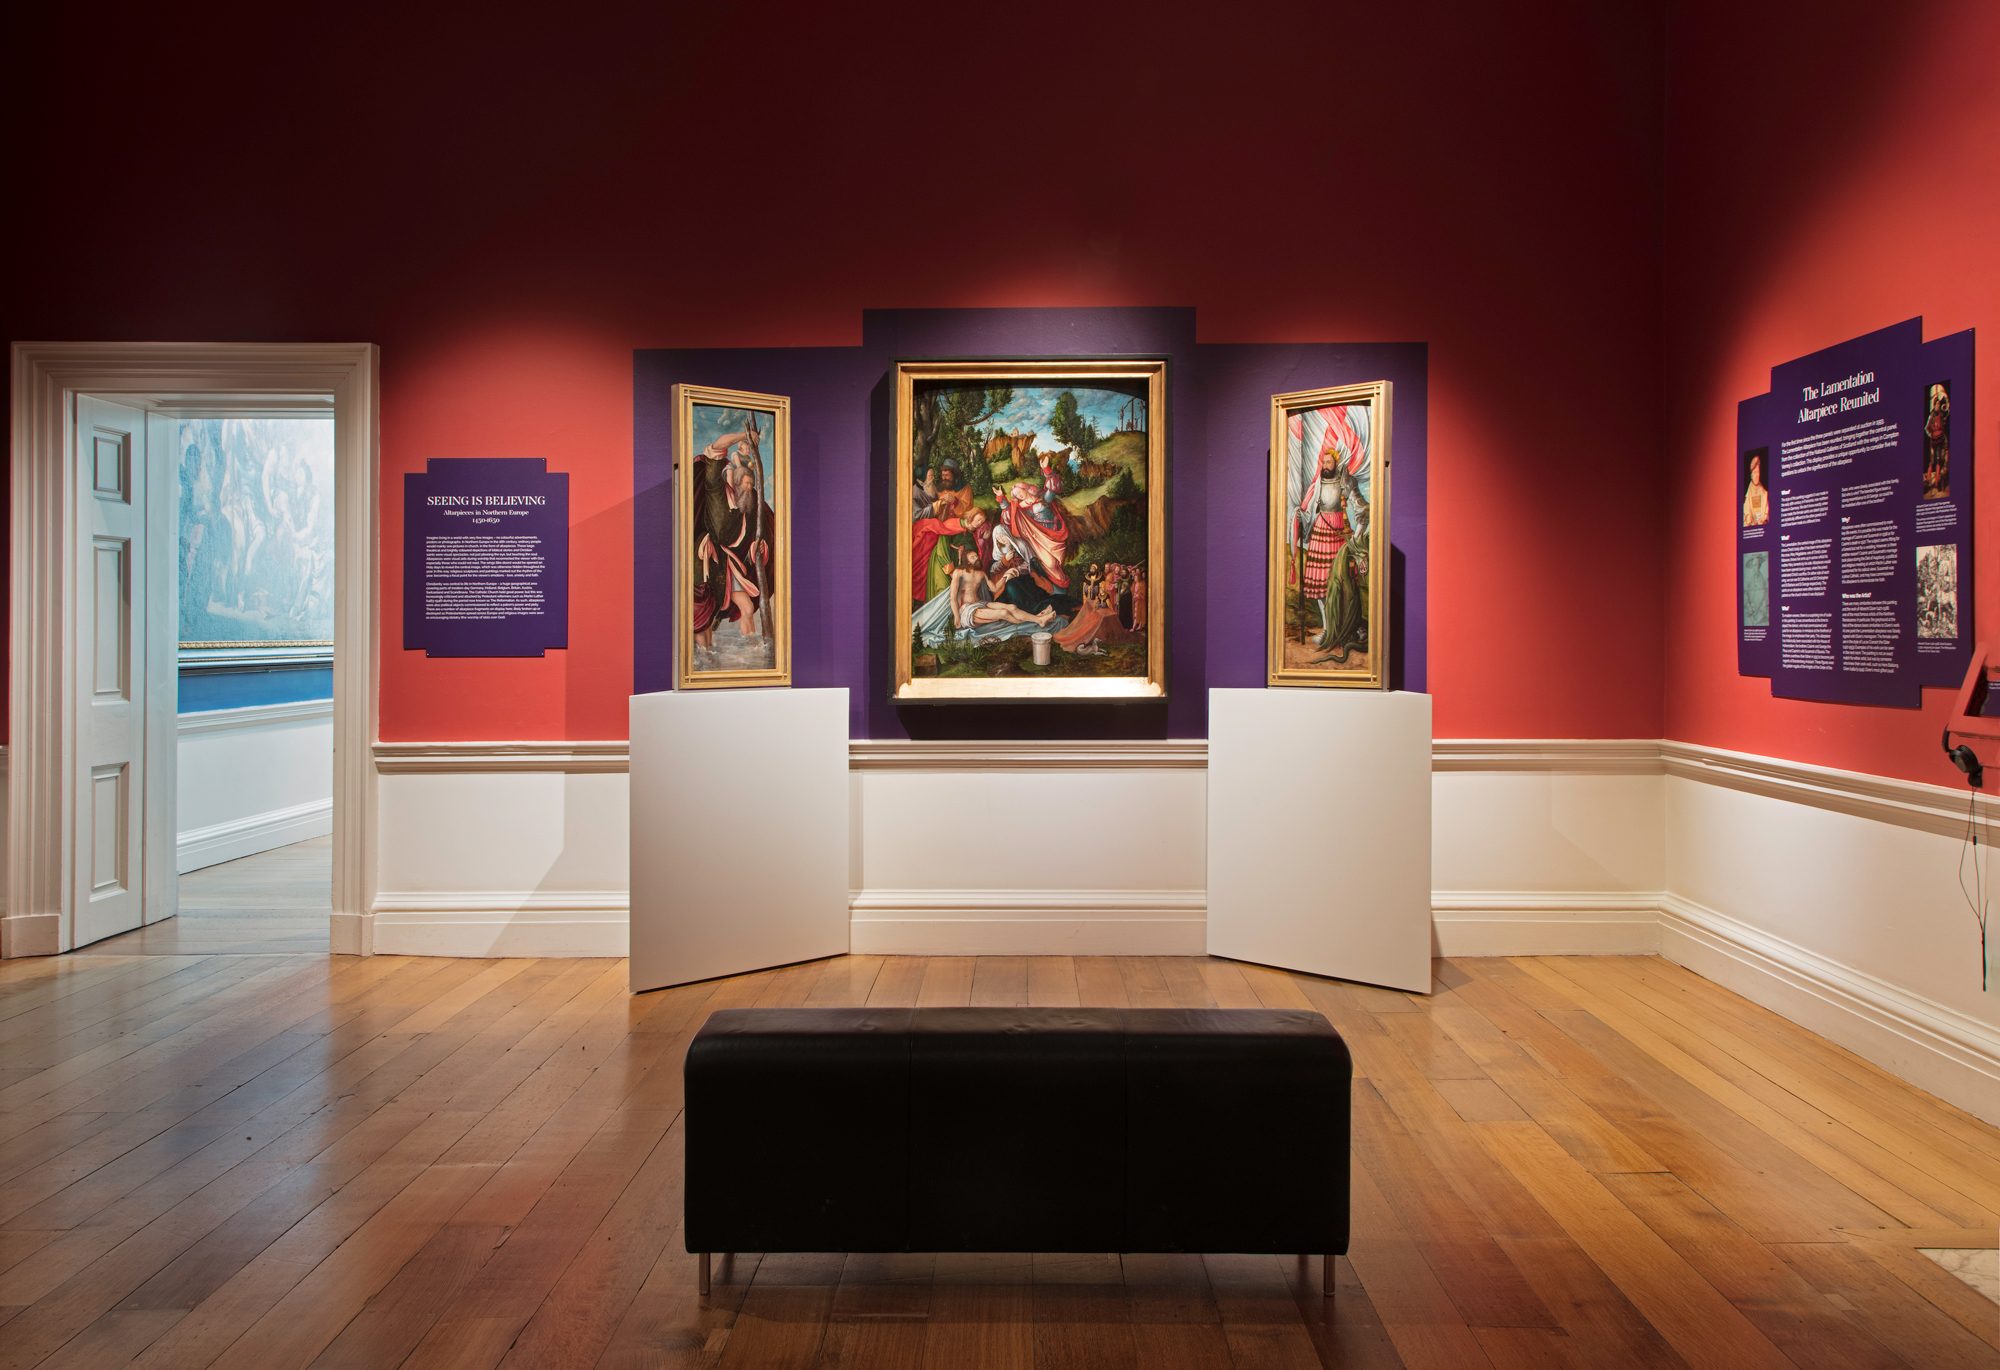 An art gallery room with red and purple walls, displaying several framed paintings and exhibits. The central painting appears to depict a biblical or mythological scene with figures in a lush, forested setting. A bench is placed in the centre of the room for viewing the artworks.